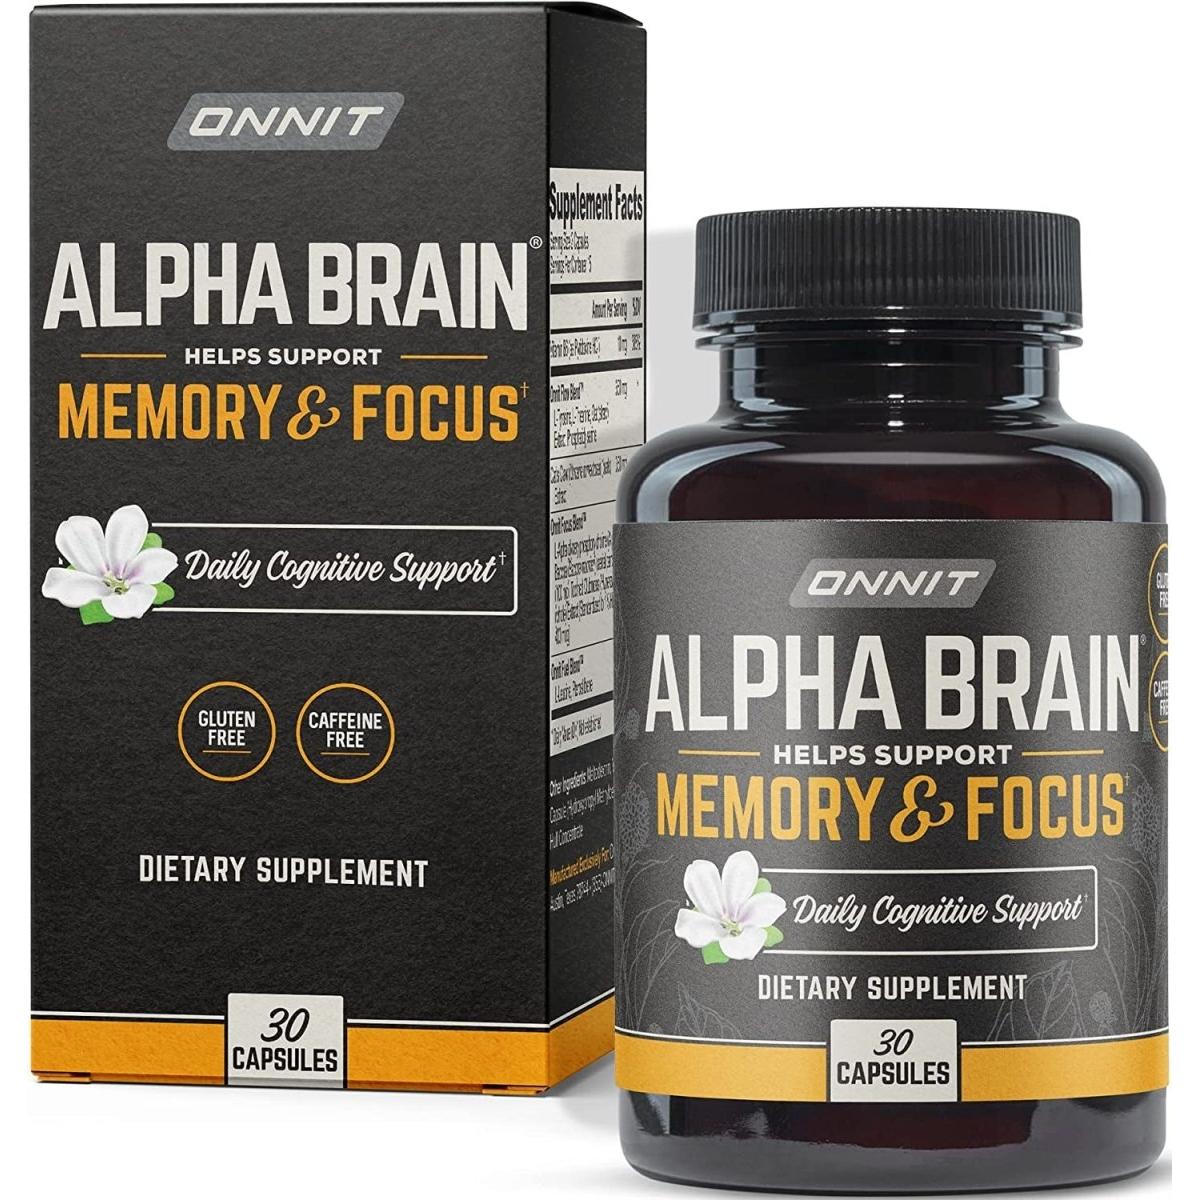 Onnit Alpha Brain Premium Nootropic Brain Supplement, 30 Count, for Men & Women - Caffeine-Free Focus Capsules for Concentration, Brain Booster& Memory Support - Cat'S Claw, Bacopa, Oat Straw - Glam Global UK